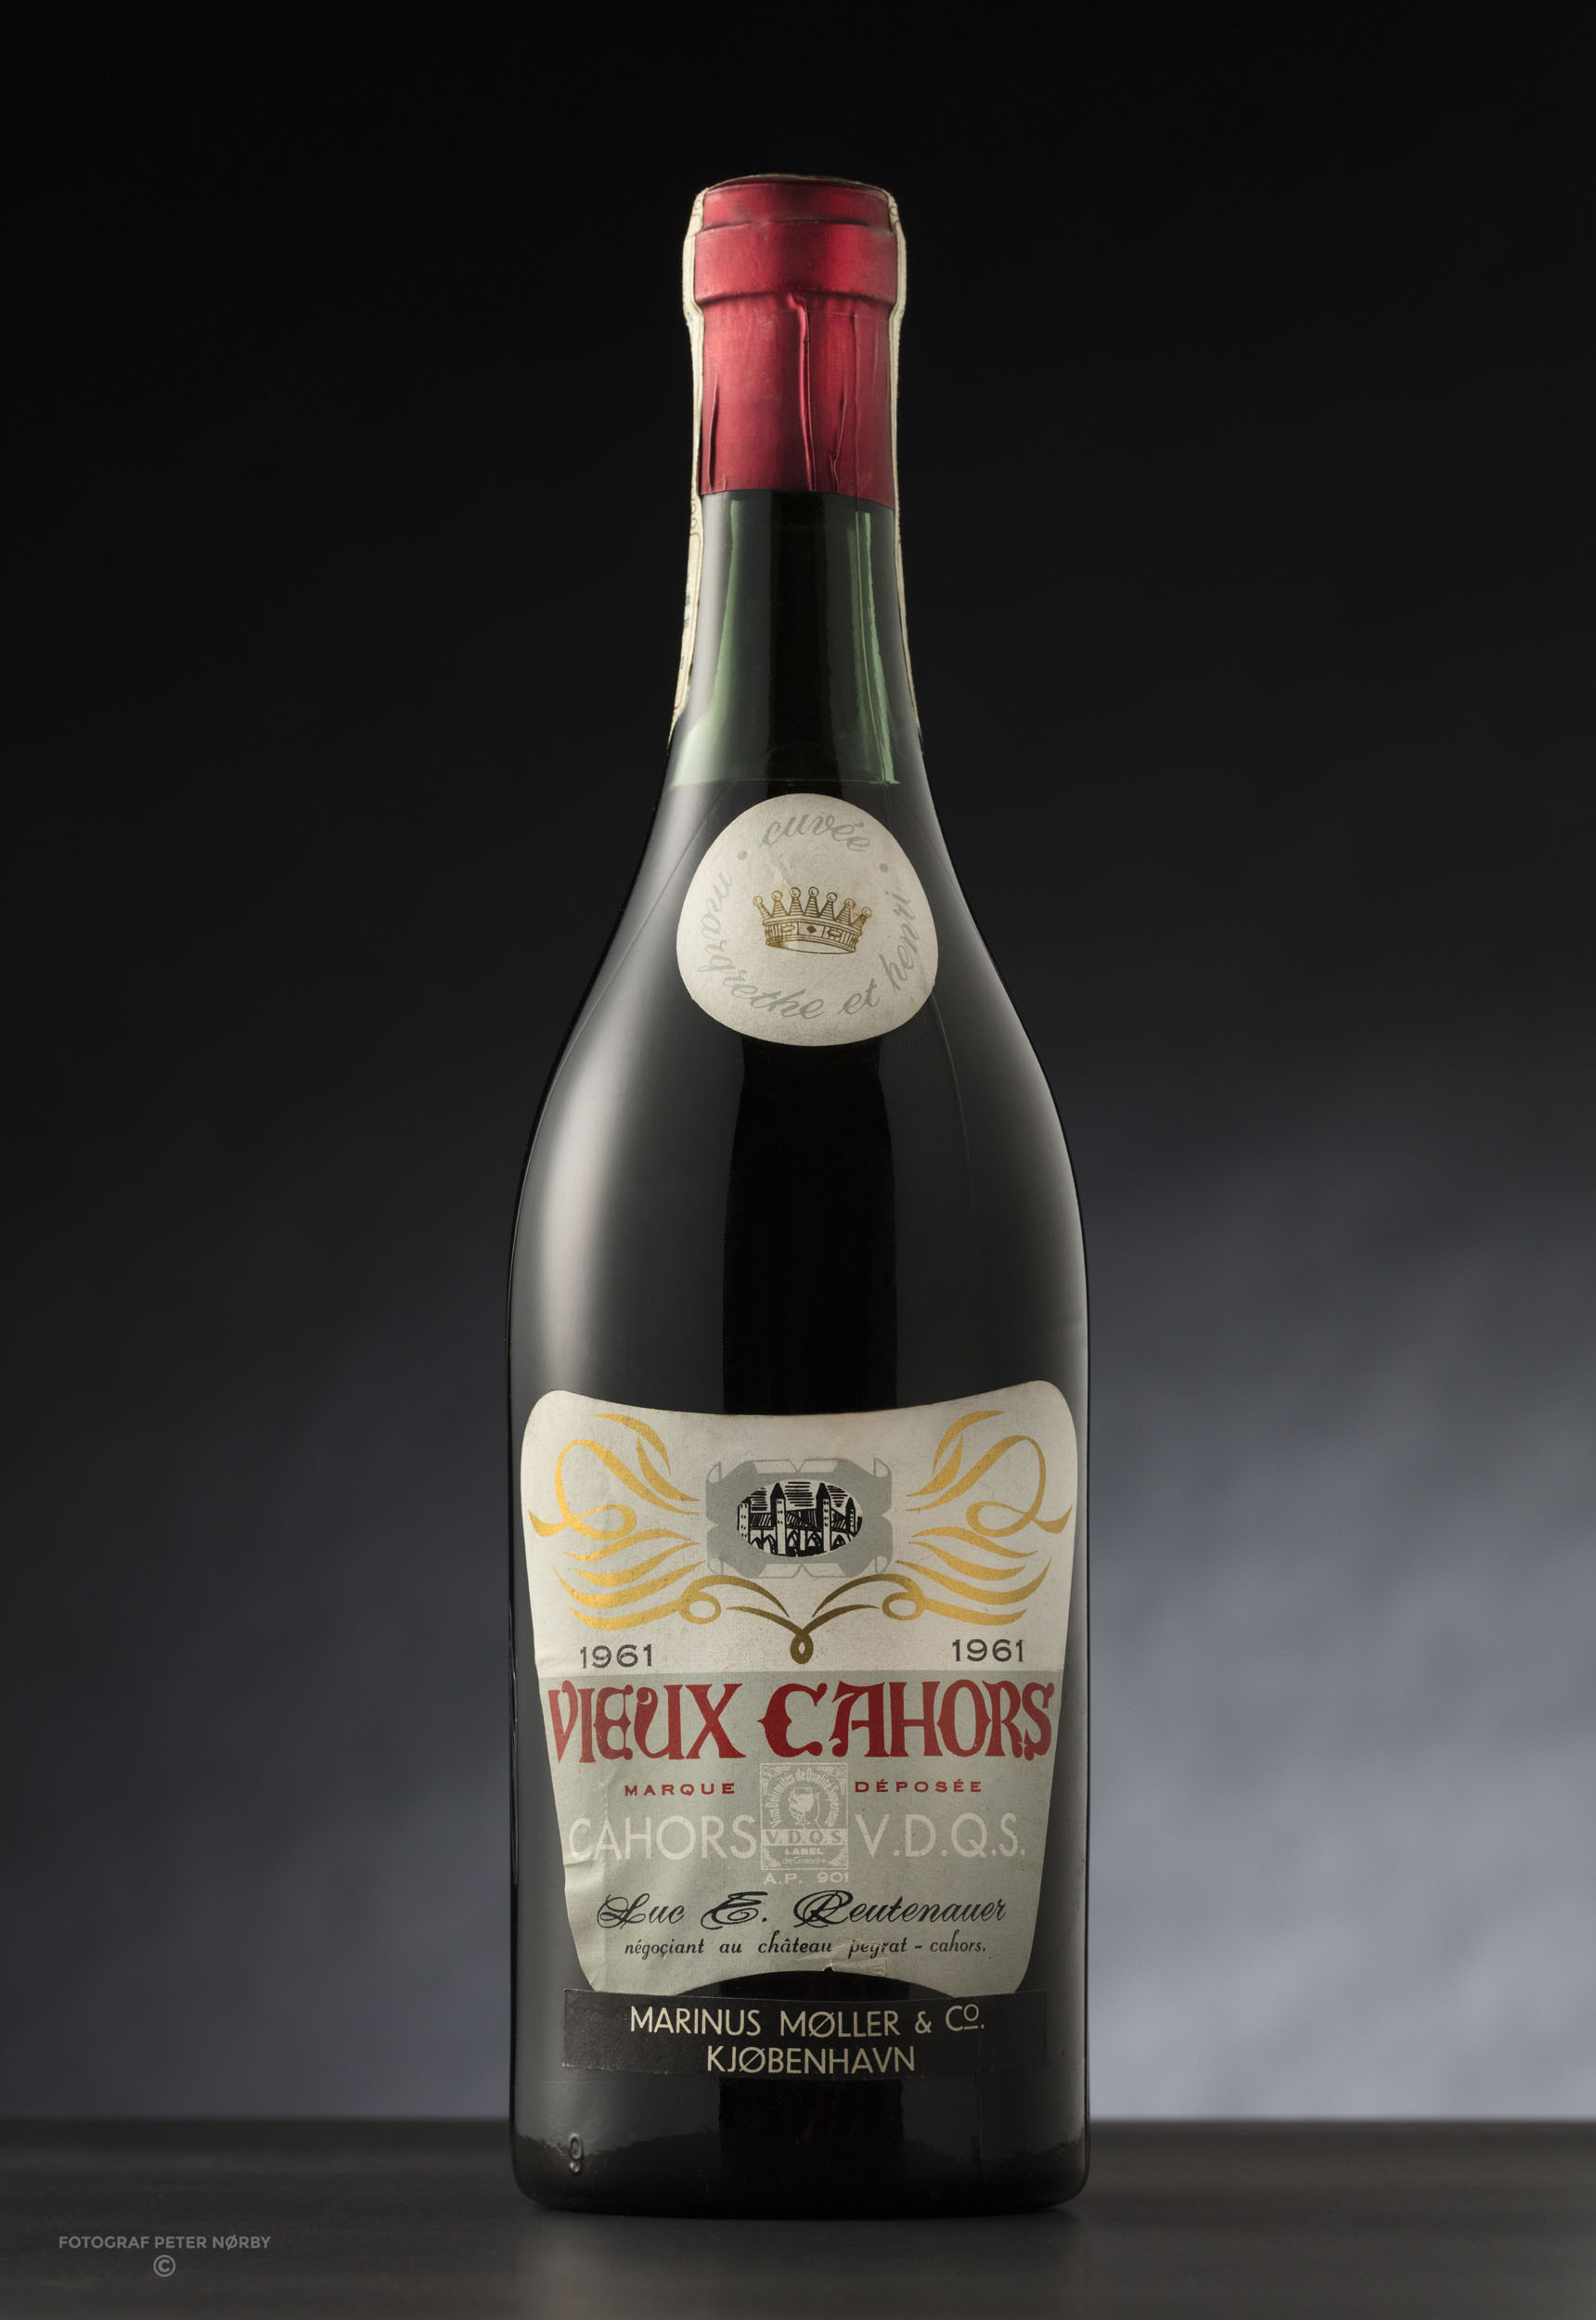  Vieux Cahors served at the wedding of HM The Queen and HRH The Prince Consort in 1961 